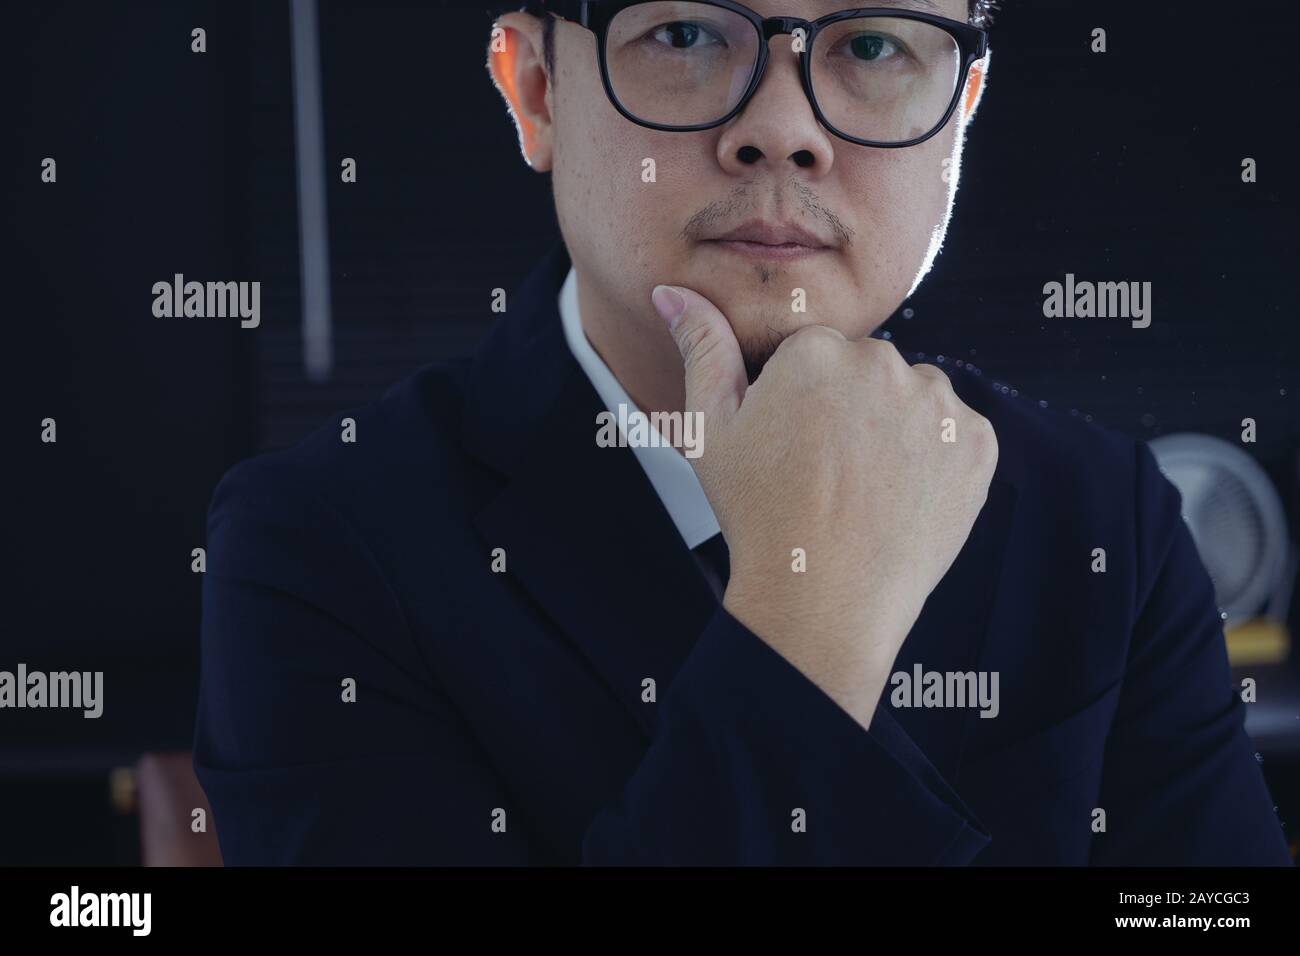 Smart businessman in suit and eyeglasses looking at camera . Closeup view . Stock Photo